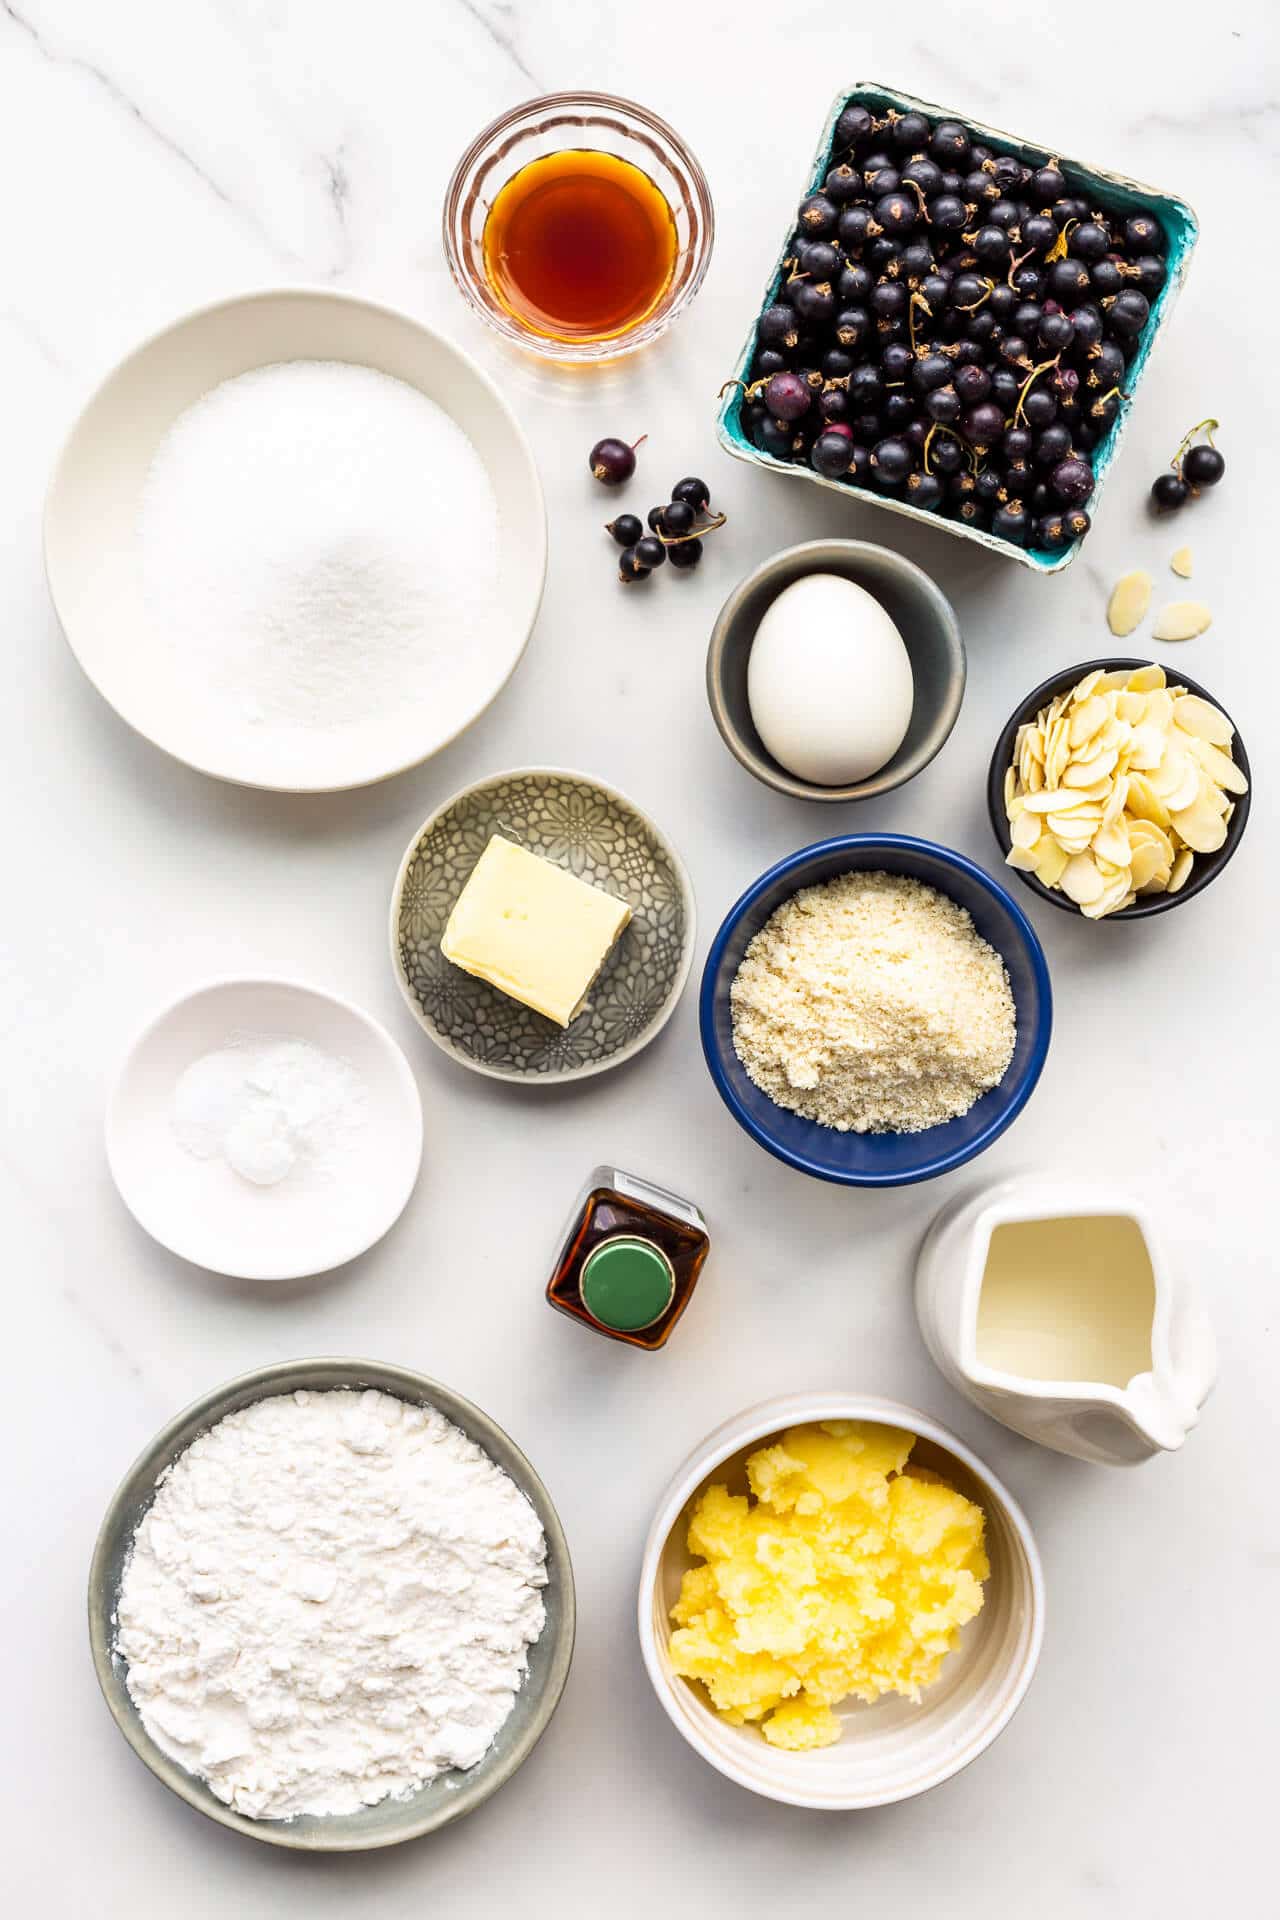 Ingredients for black currant cake measured out into small dishes, including black currants, vanilla extract, granulated sugar, egg, butter, ground almond, baking powder, salt, milk, flour, and a sugar paste to make a crispy topping